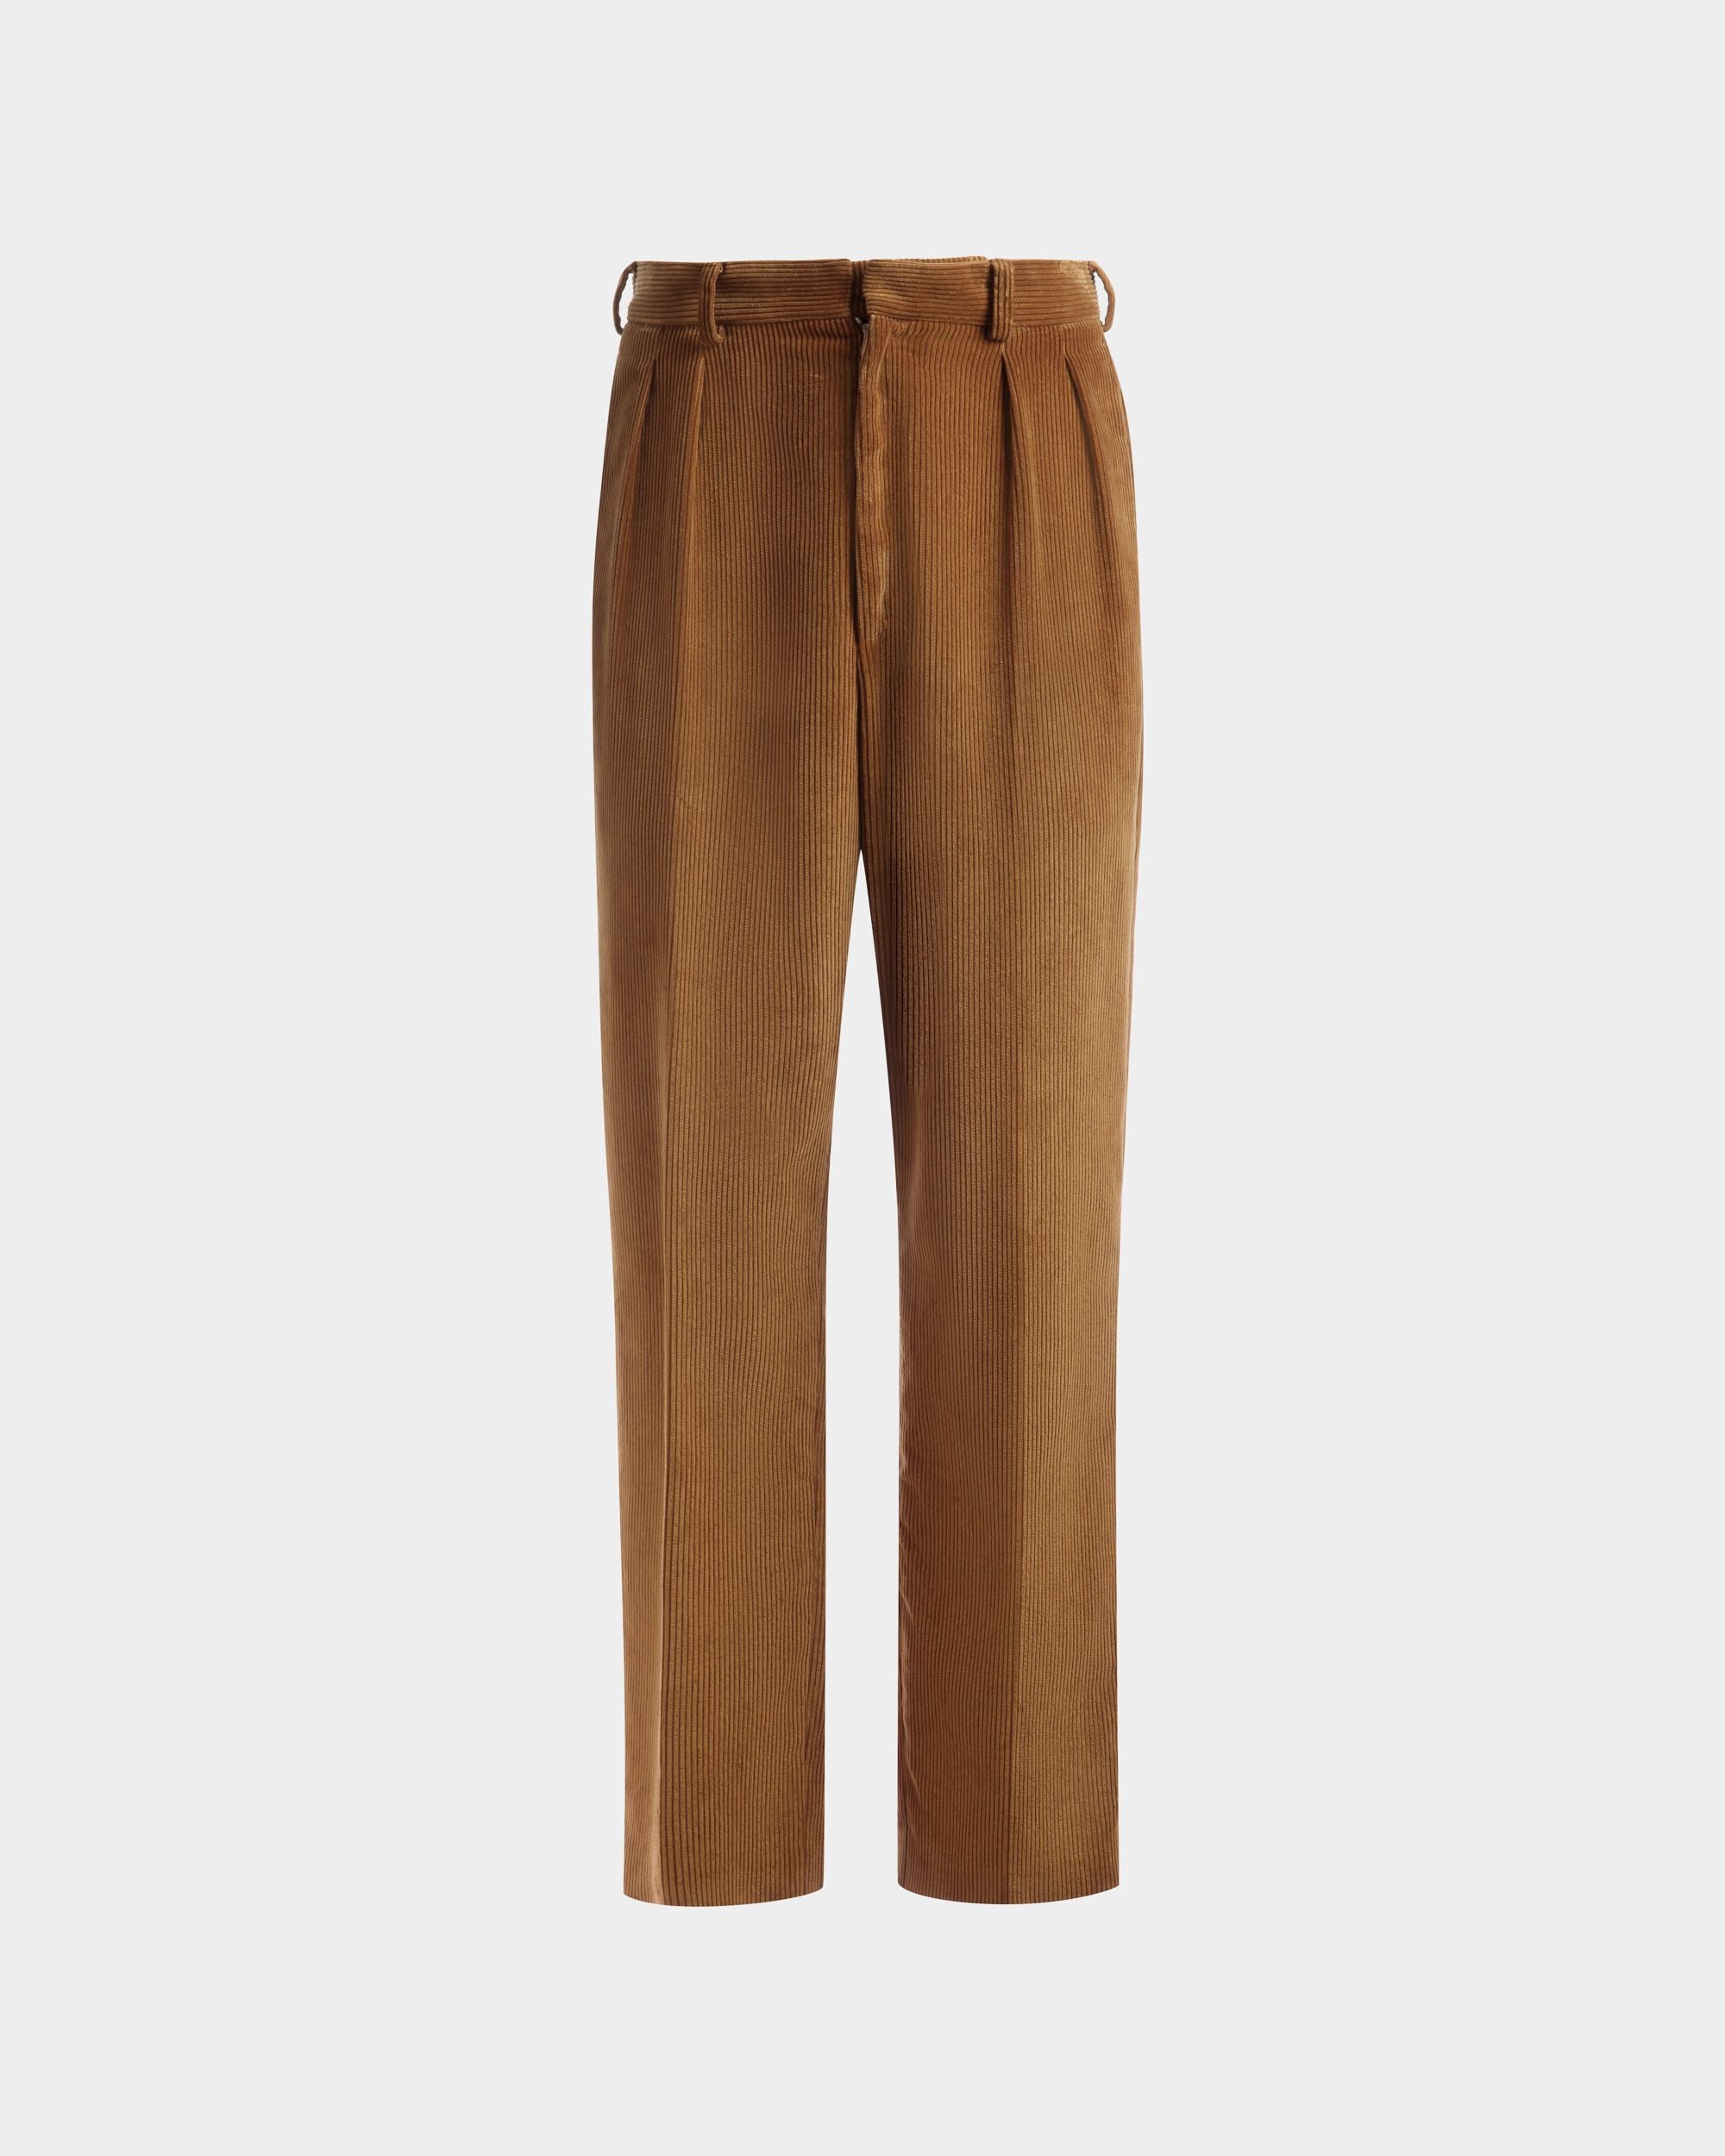 Men's Corduroy Tailored Pants In Camel Cotton | Bally | Still Life Front